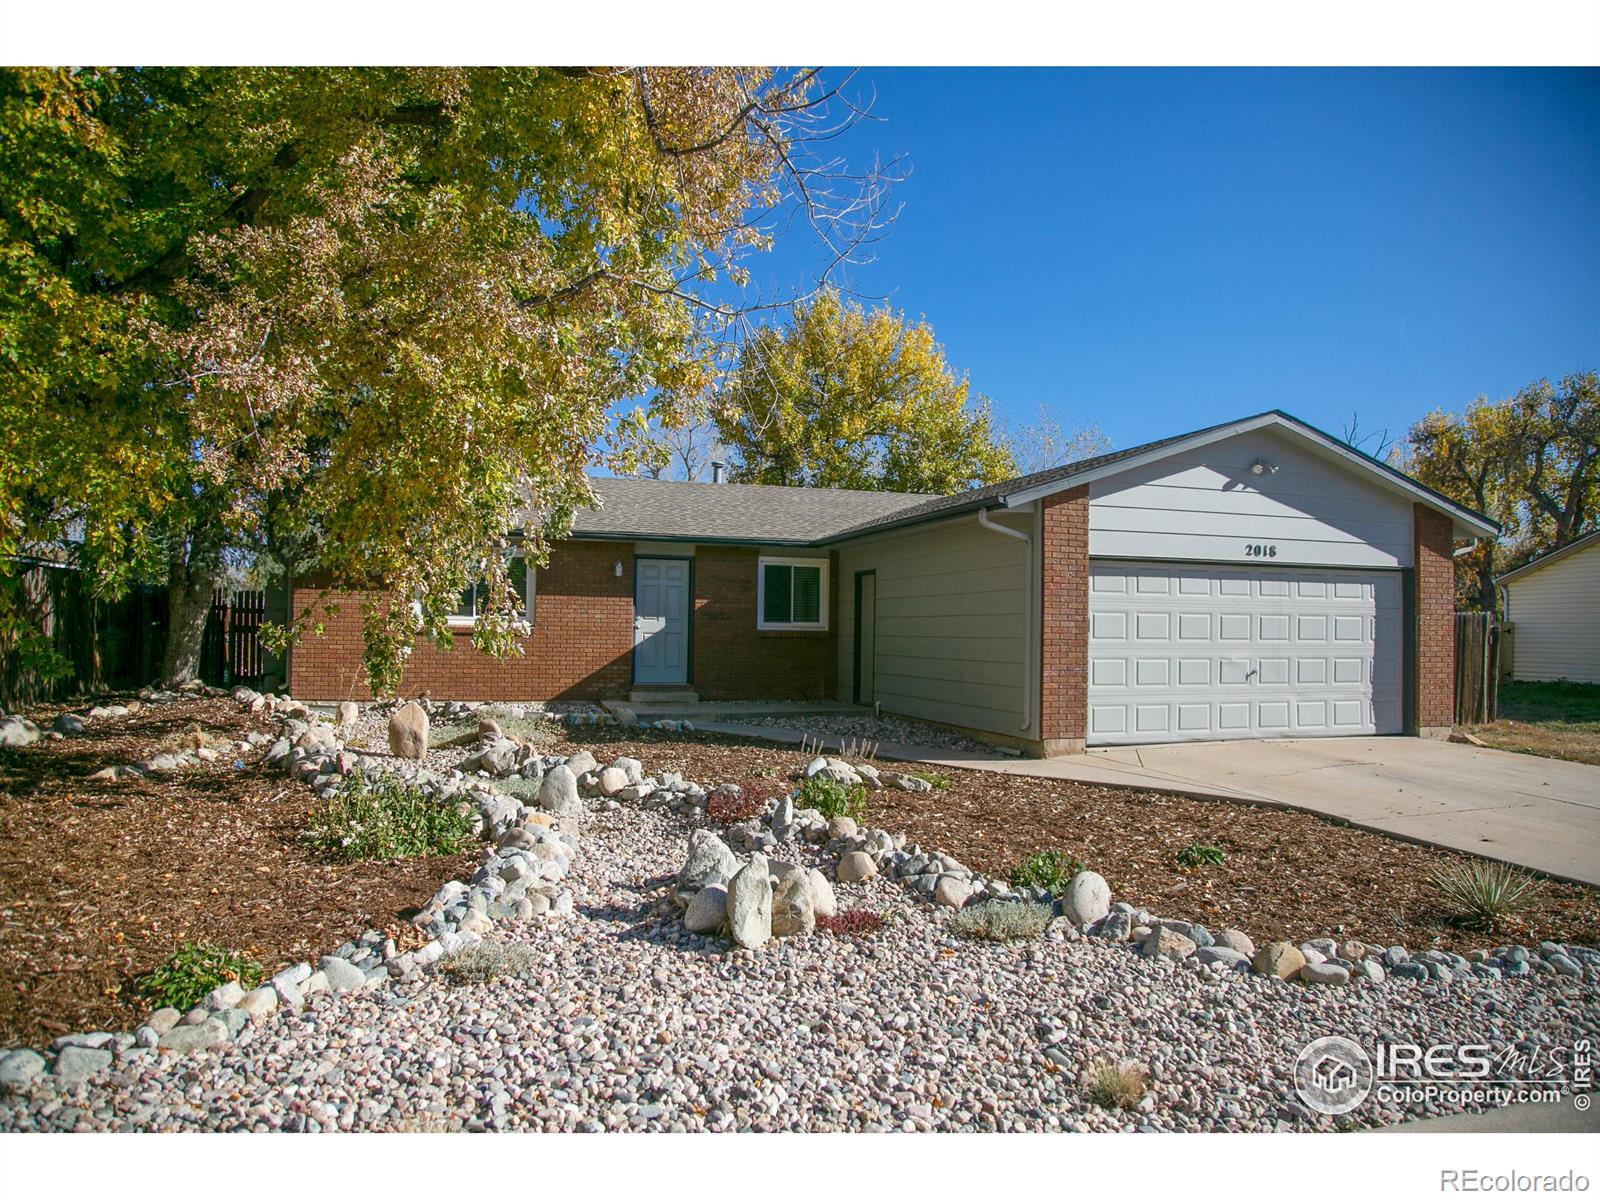 Report Image for 2018  Langshire Drive,Fort Collins, Colorado